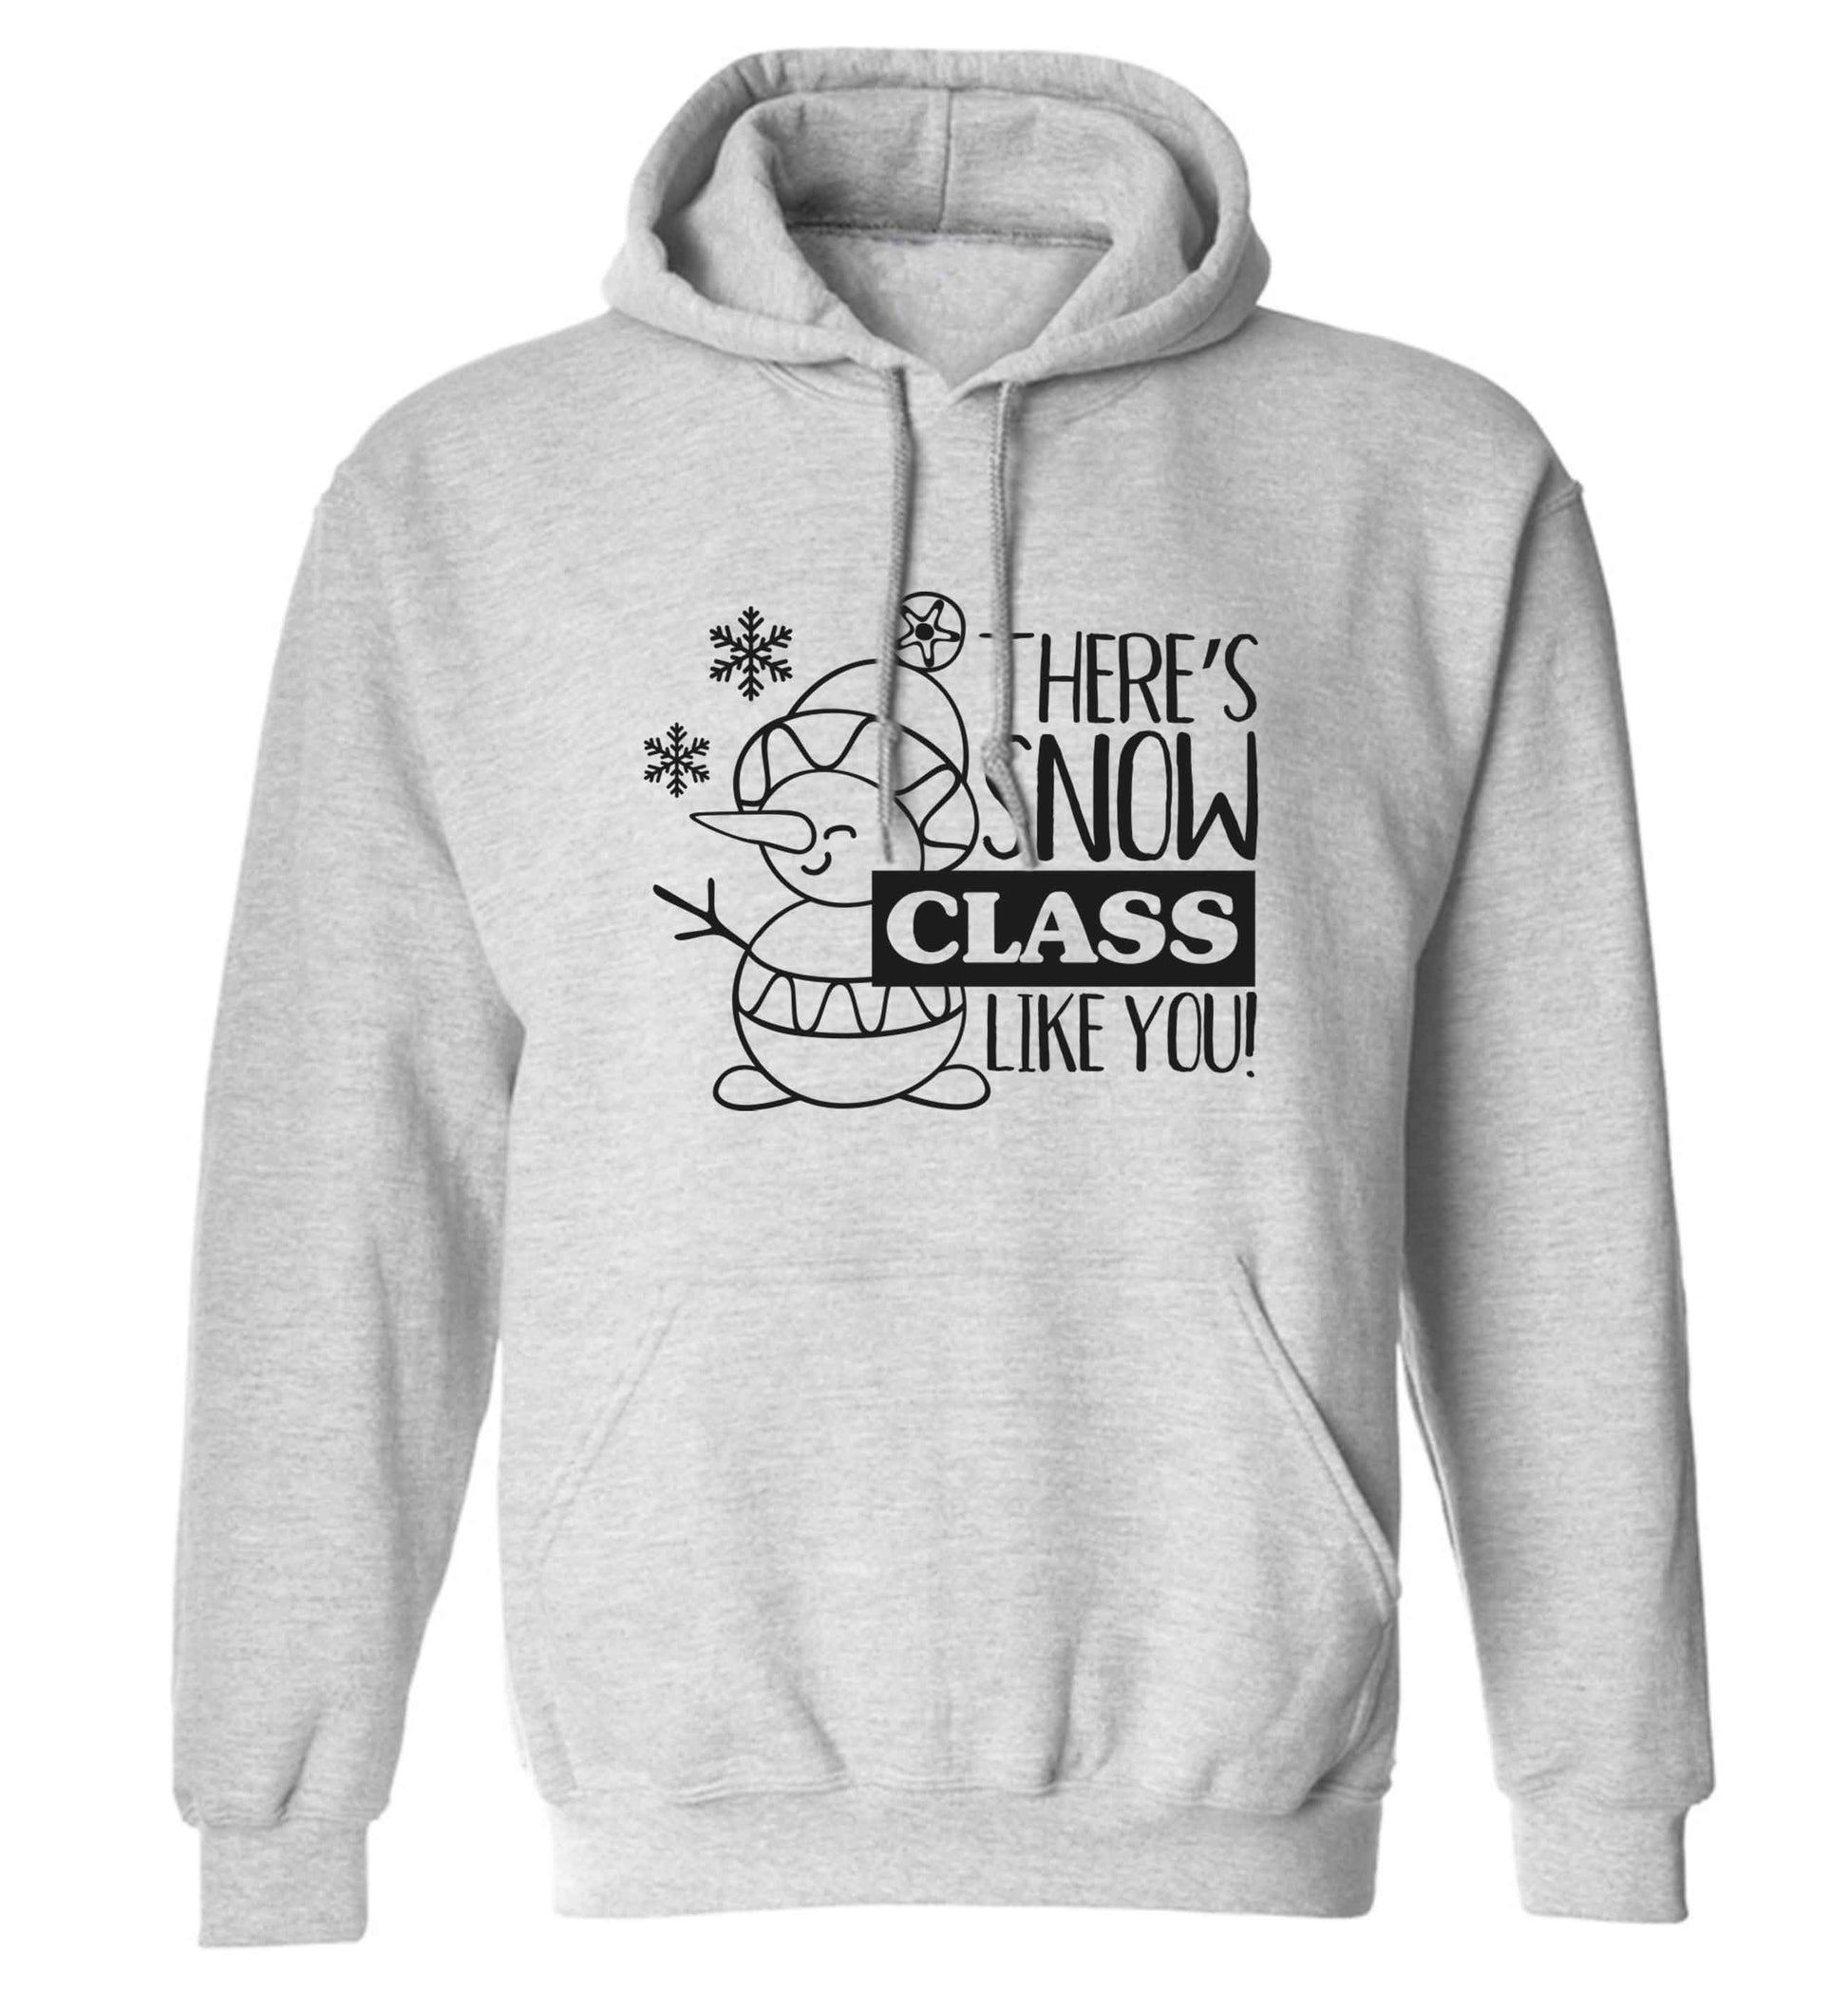 There's snow class like you adults unisex grey hoodie 2XL